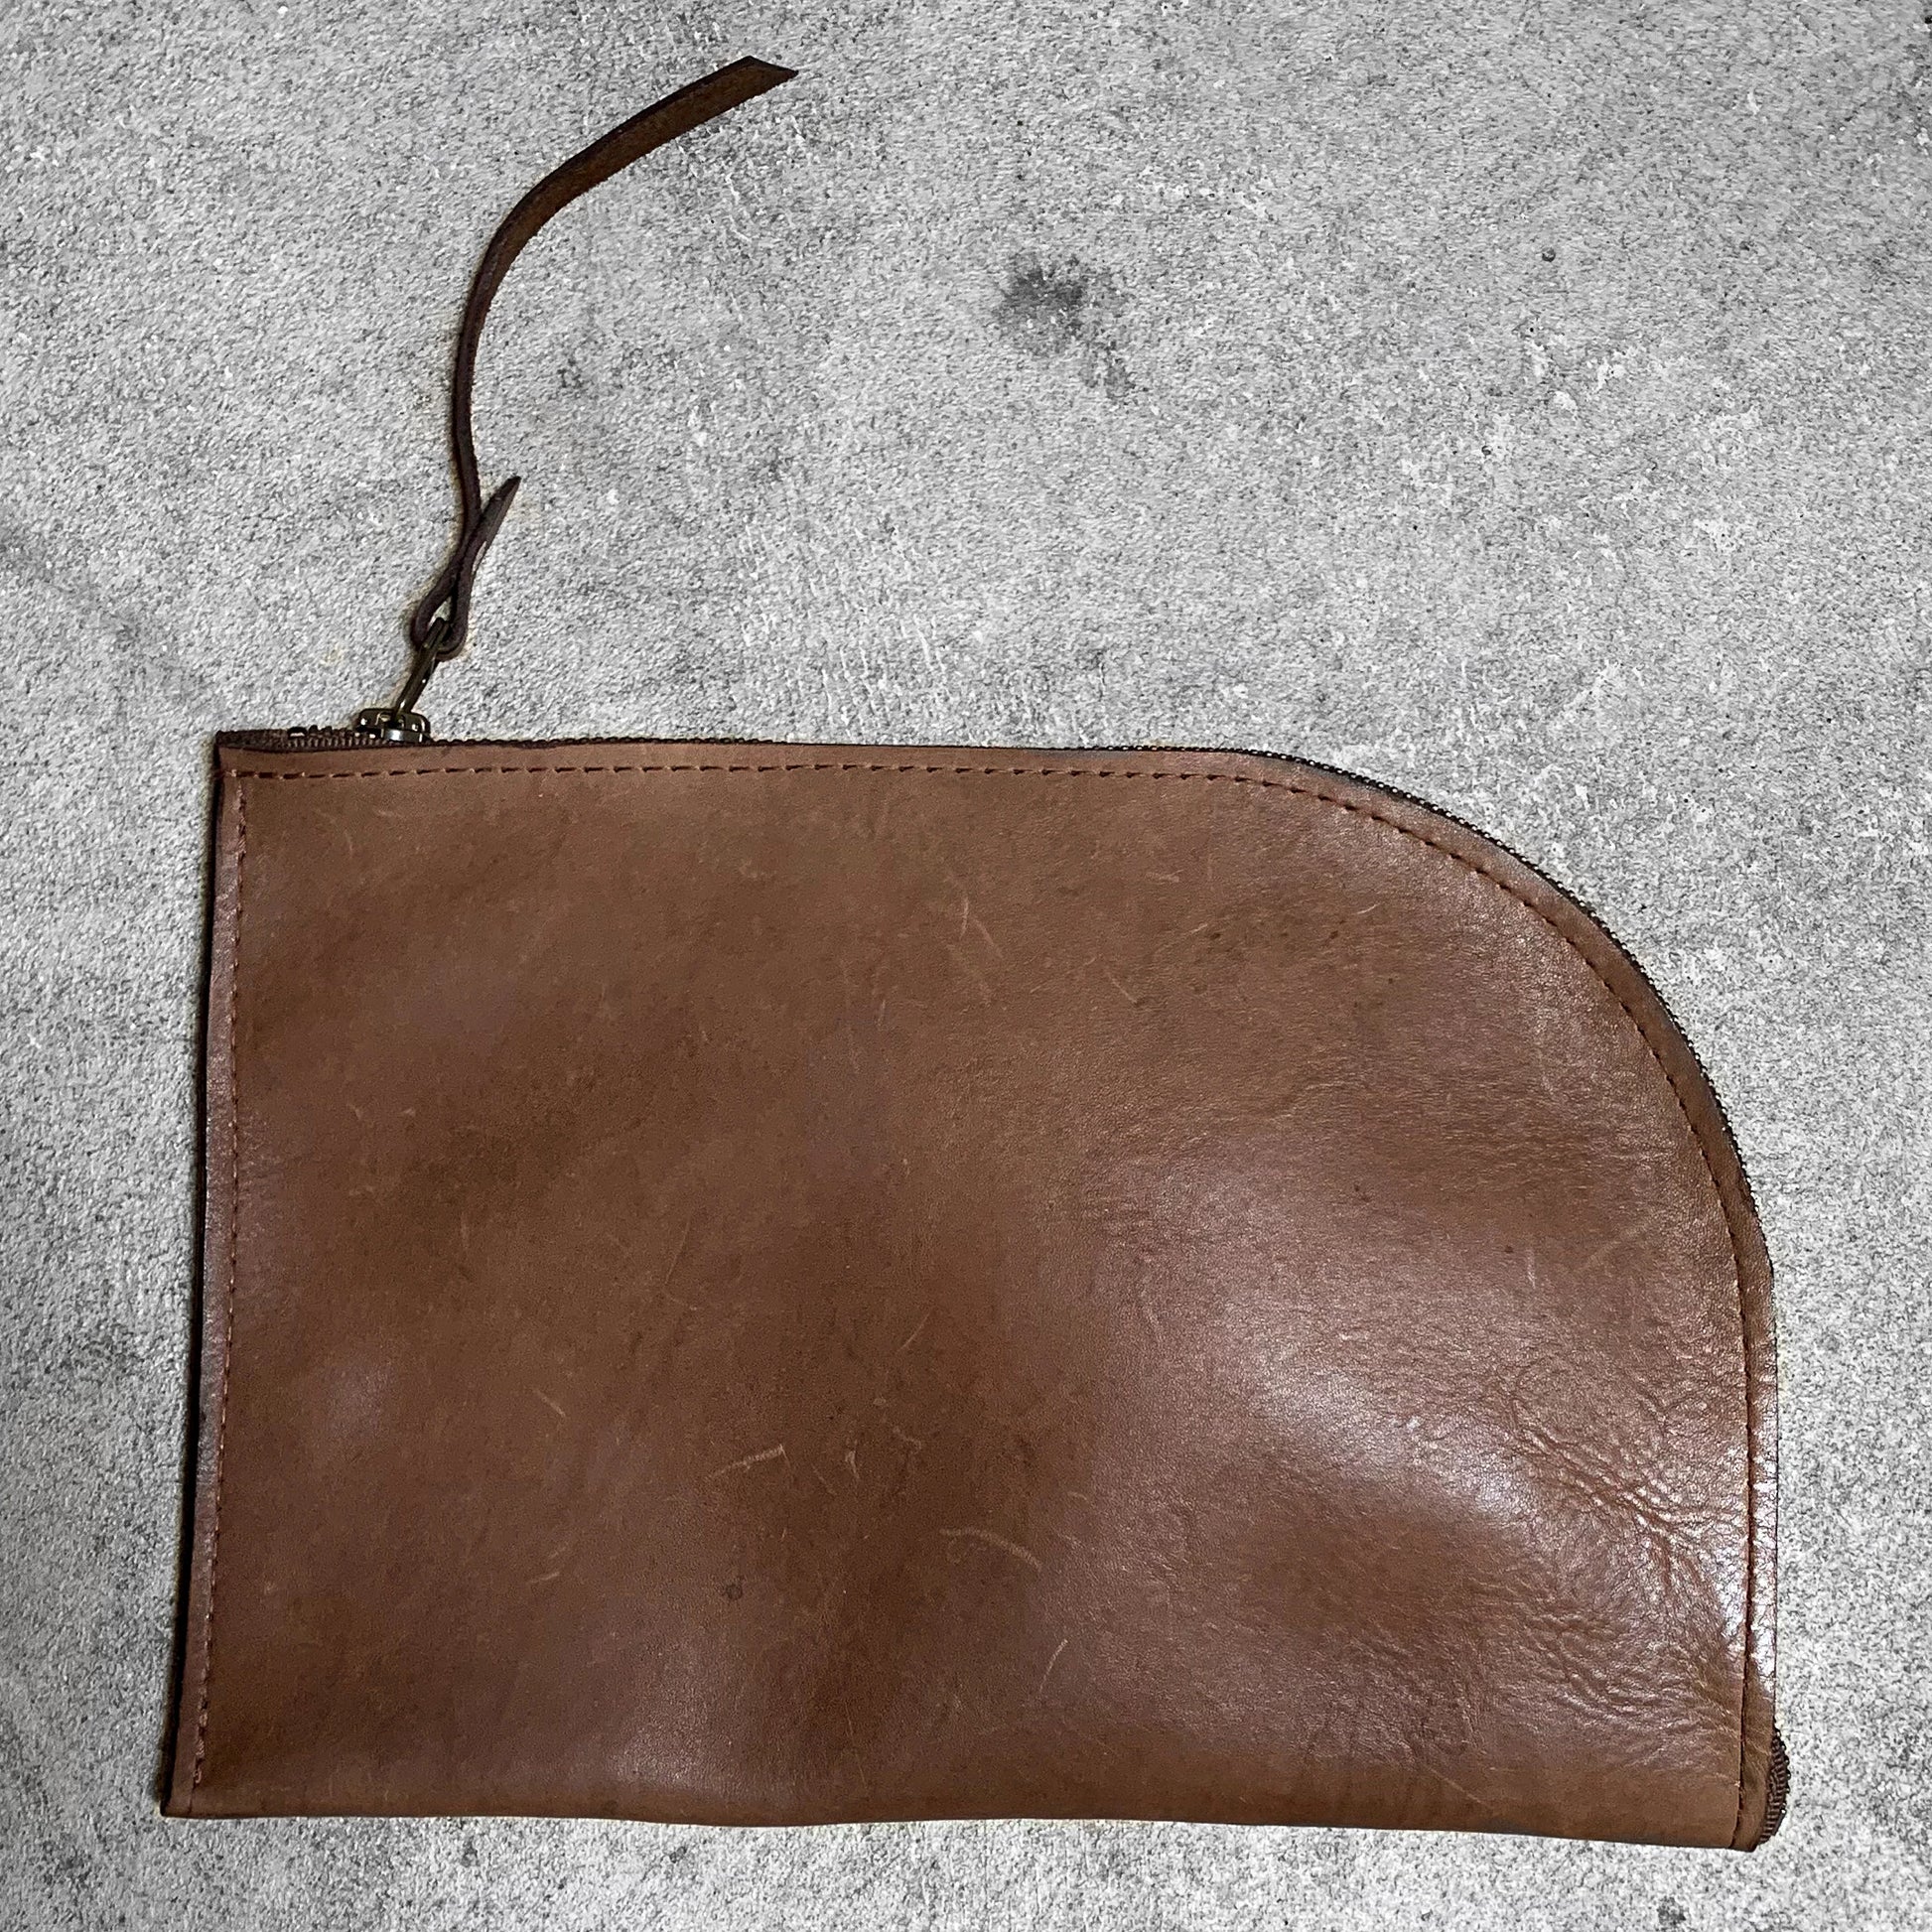 Leather Clutch in saddle, by Admonish.